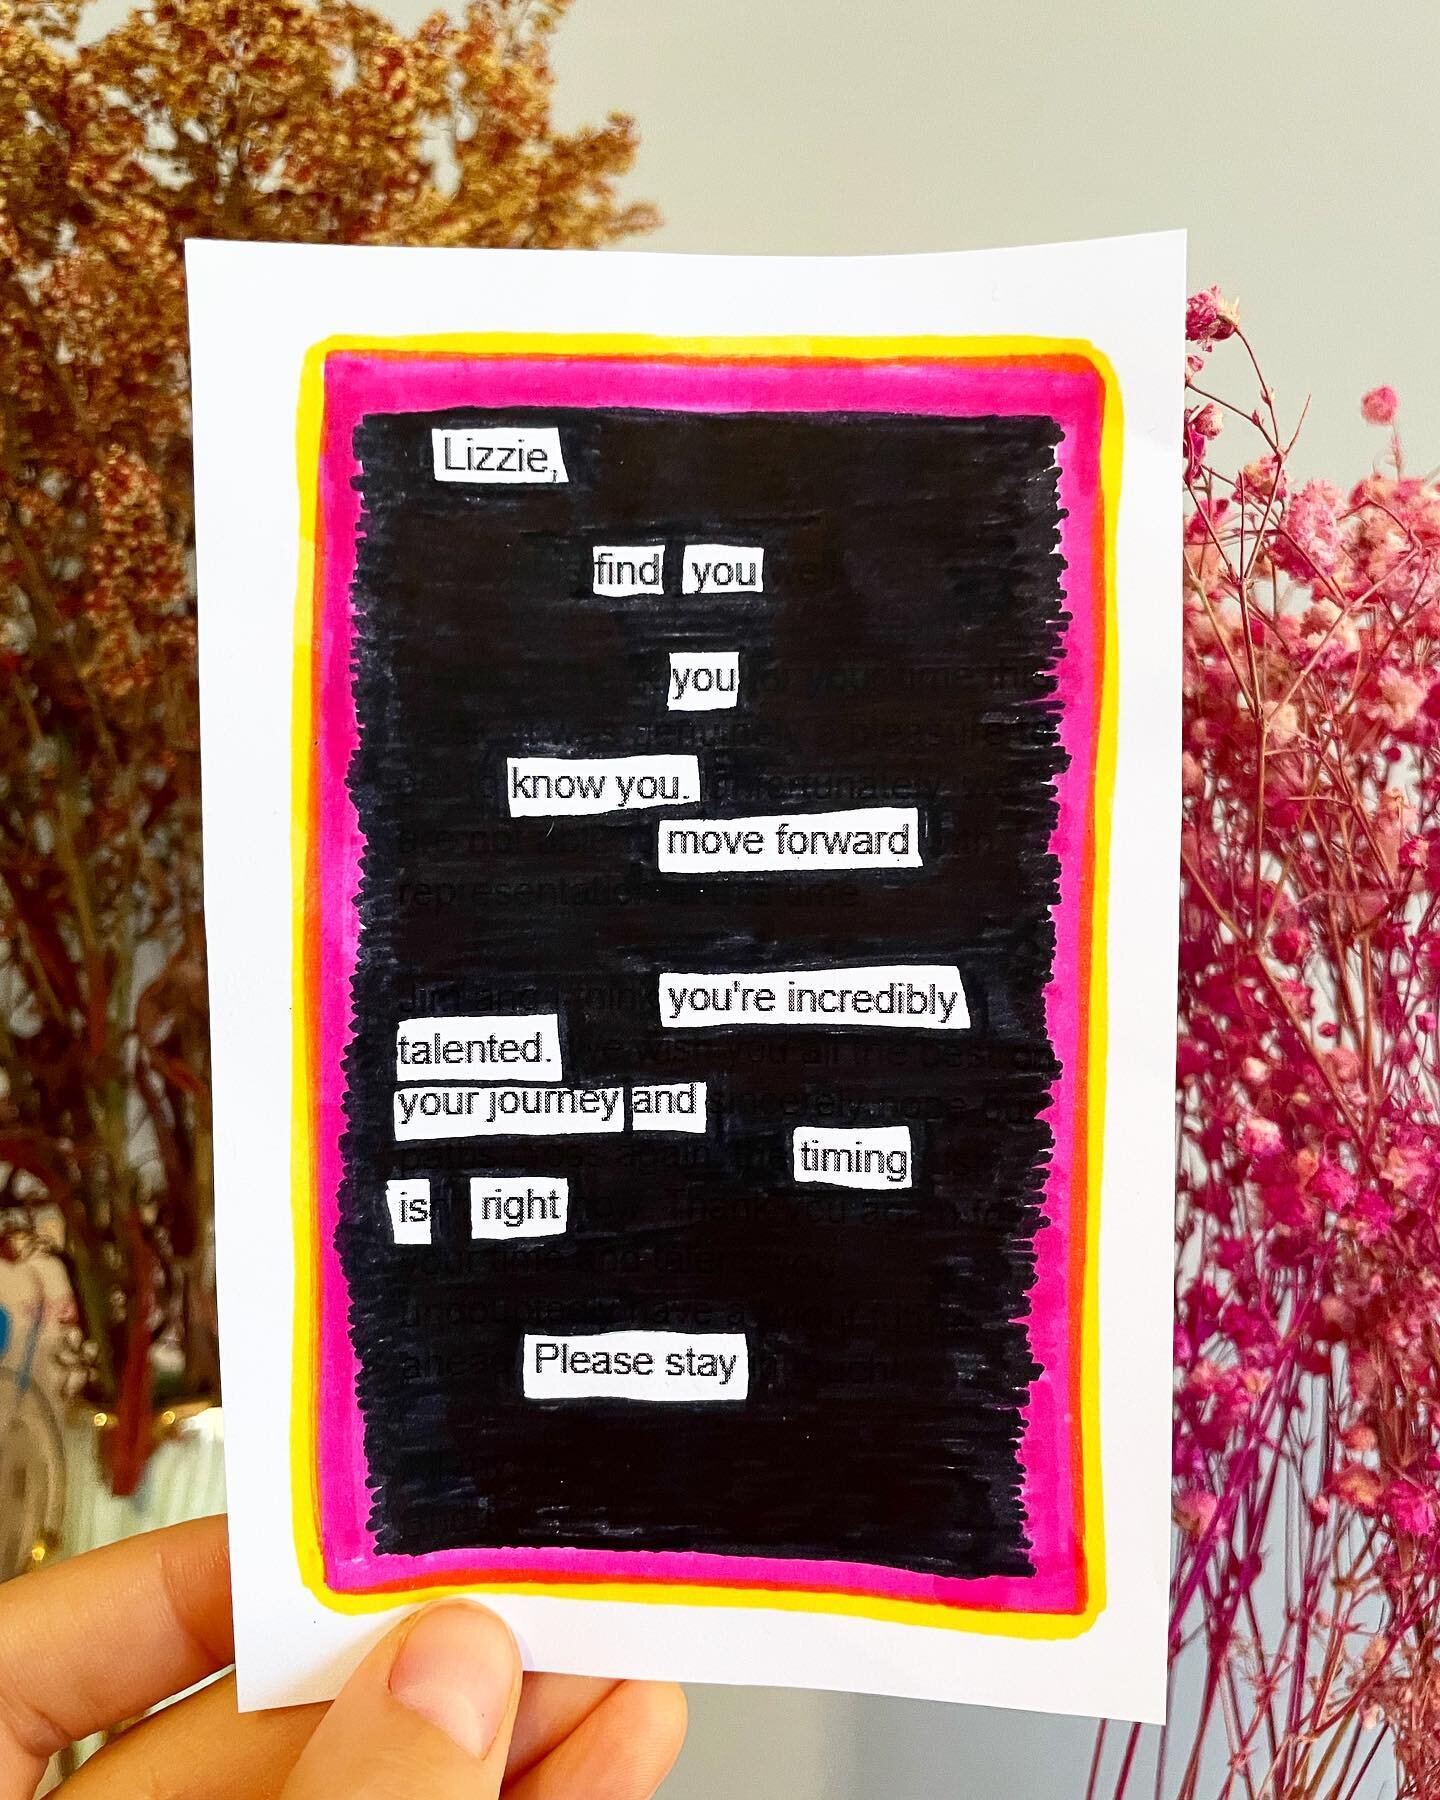 Highly recommend turning your (agent) rejection email(s) into poetry. Can confirm it is quite healing and empowering. 

#blackoutpoetry